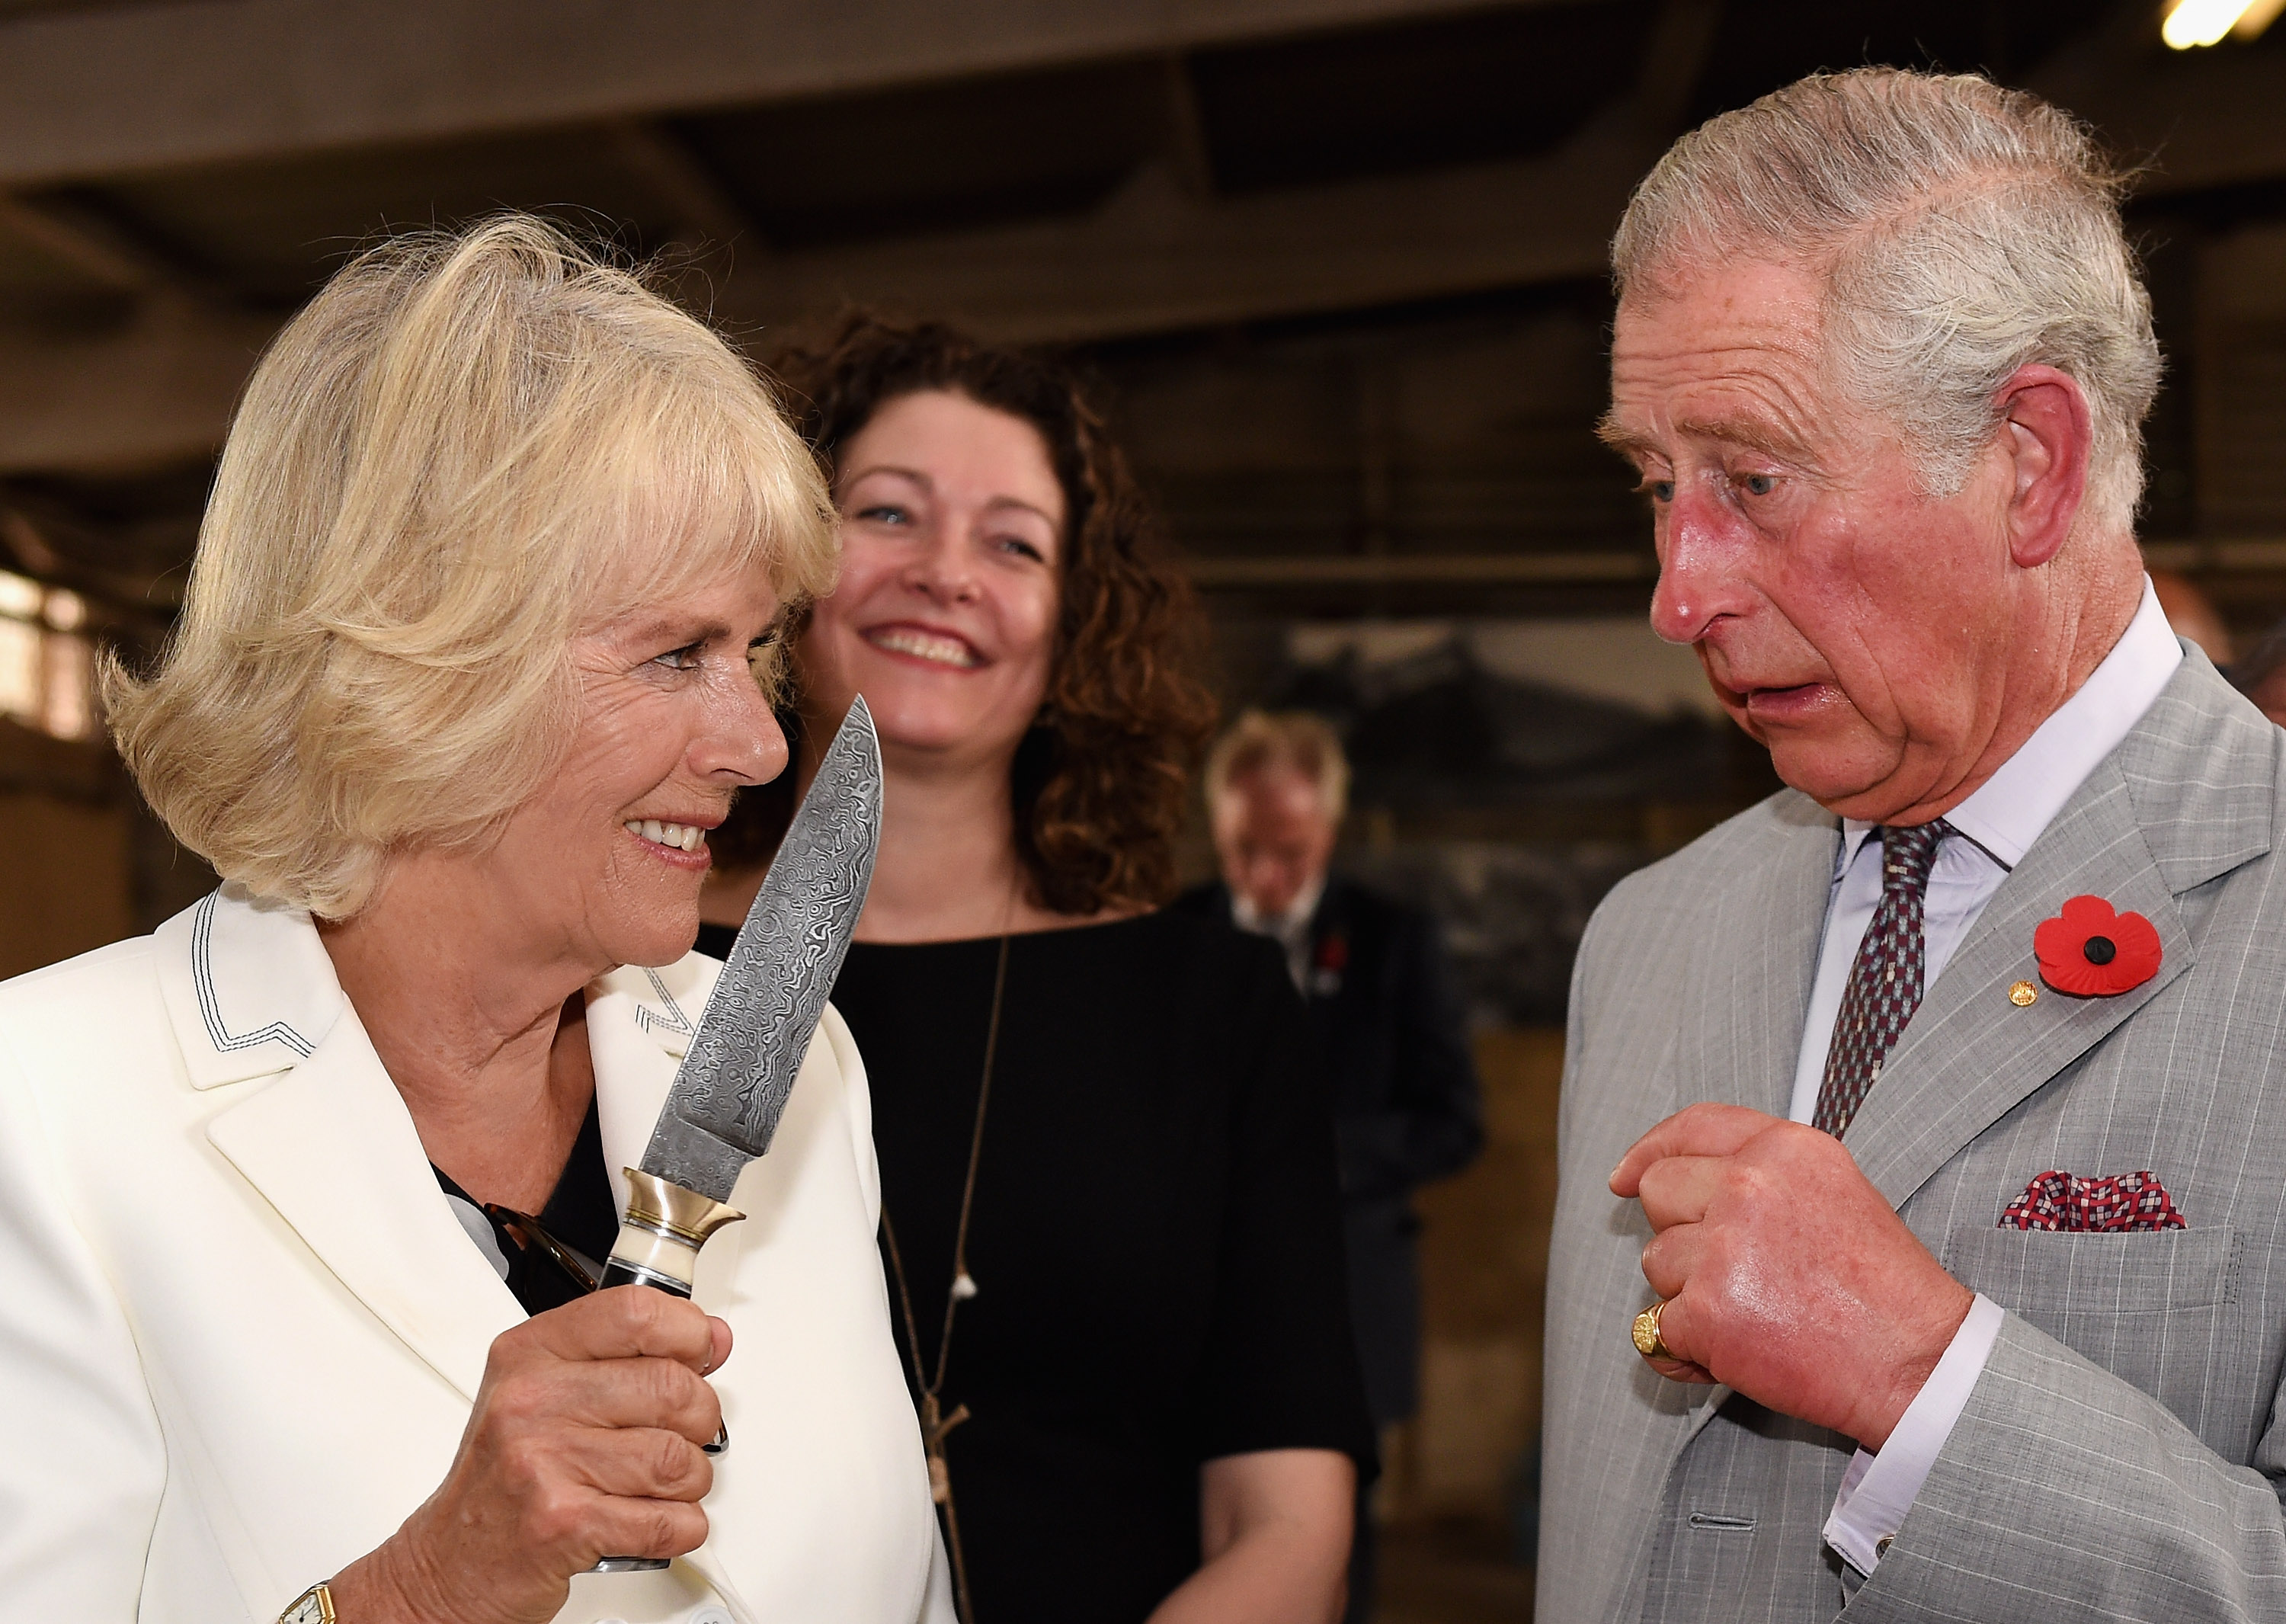 Camilla Parker Bowles holding a knife up in front of Prince Charles during a visit to a winery in Australia